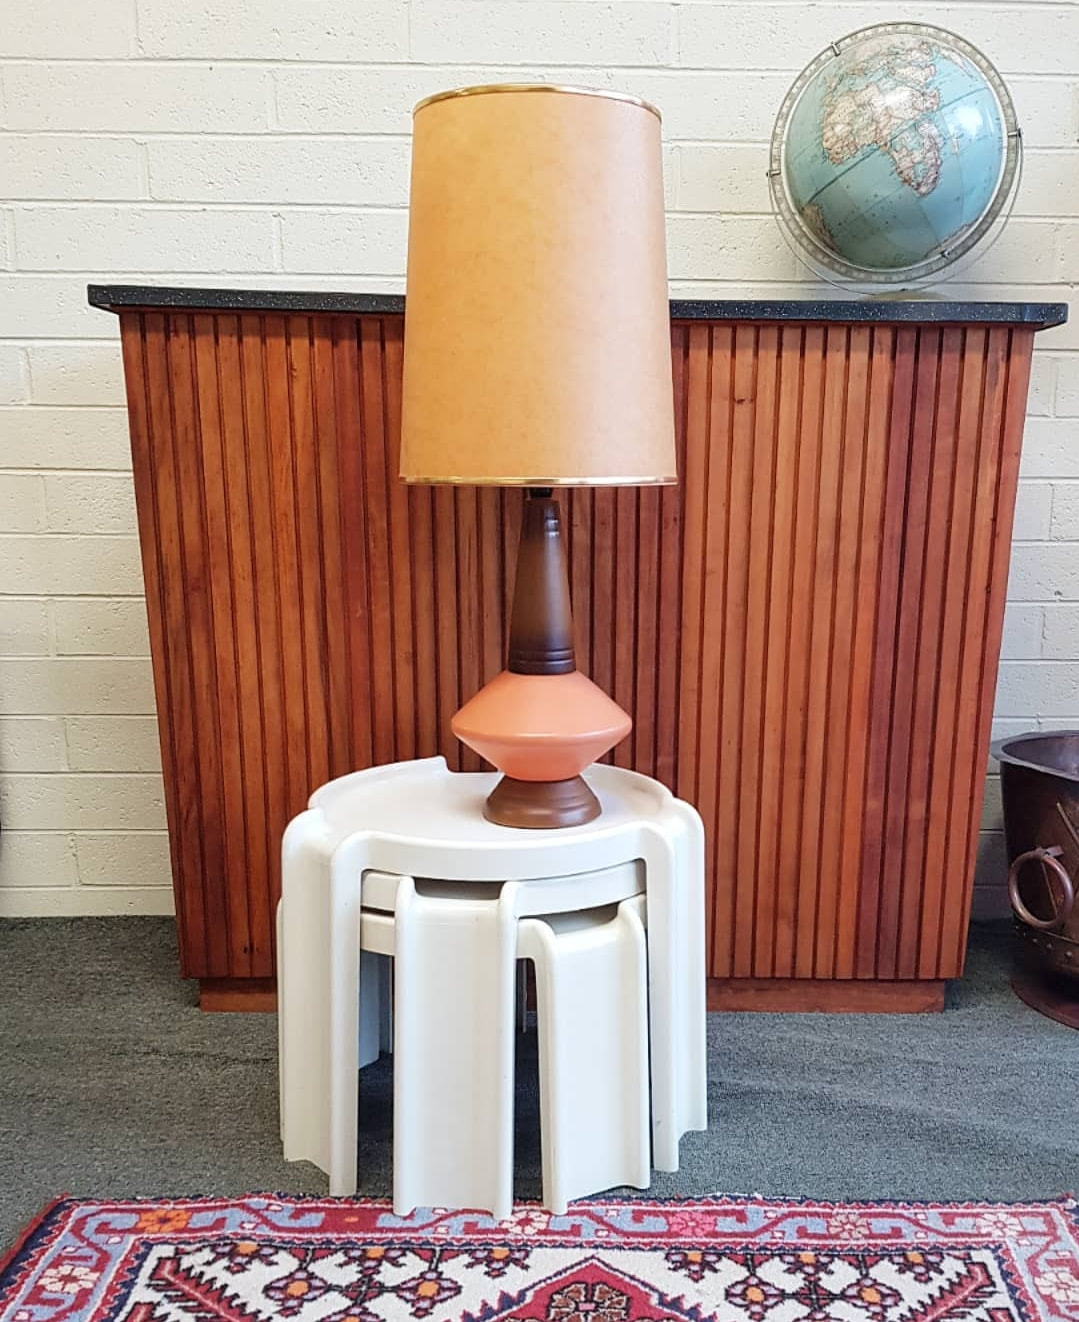 Mid Century Stacking Nesting Tables designed by Giotto Stoppino for Kartell c.1970 // Mid Century Ceramic Lamp with Original Shade c.1960